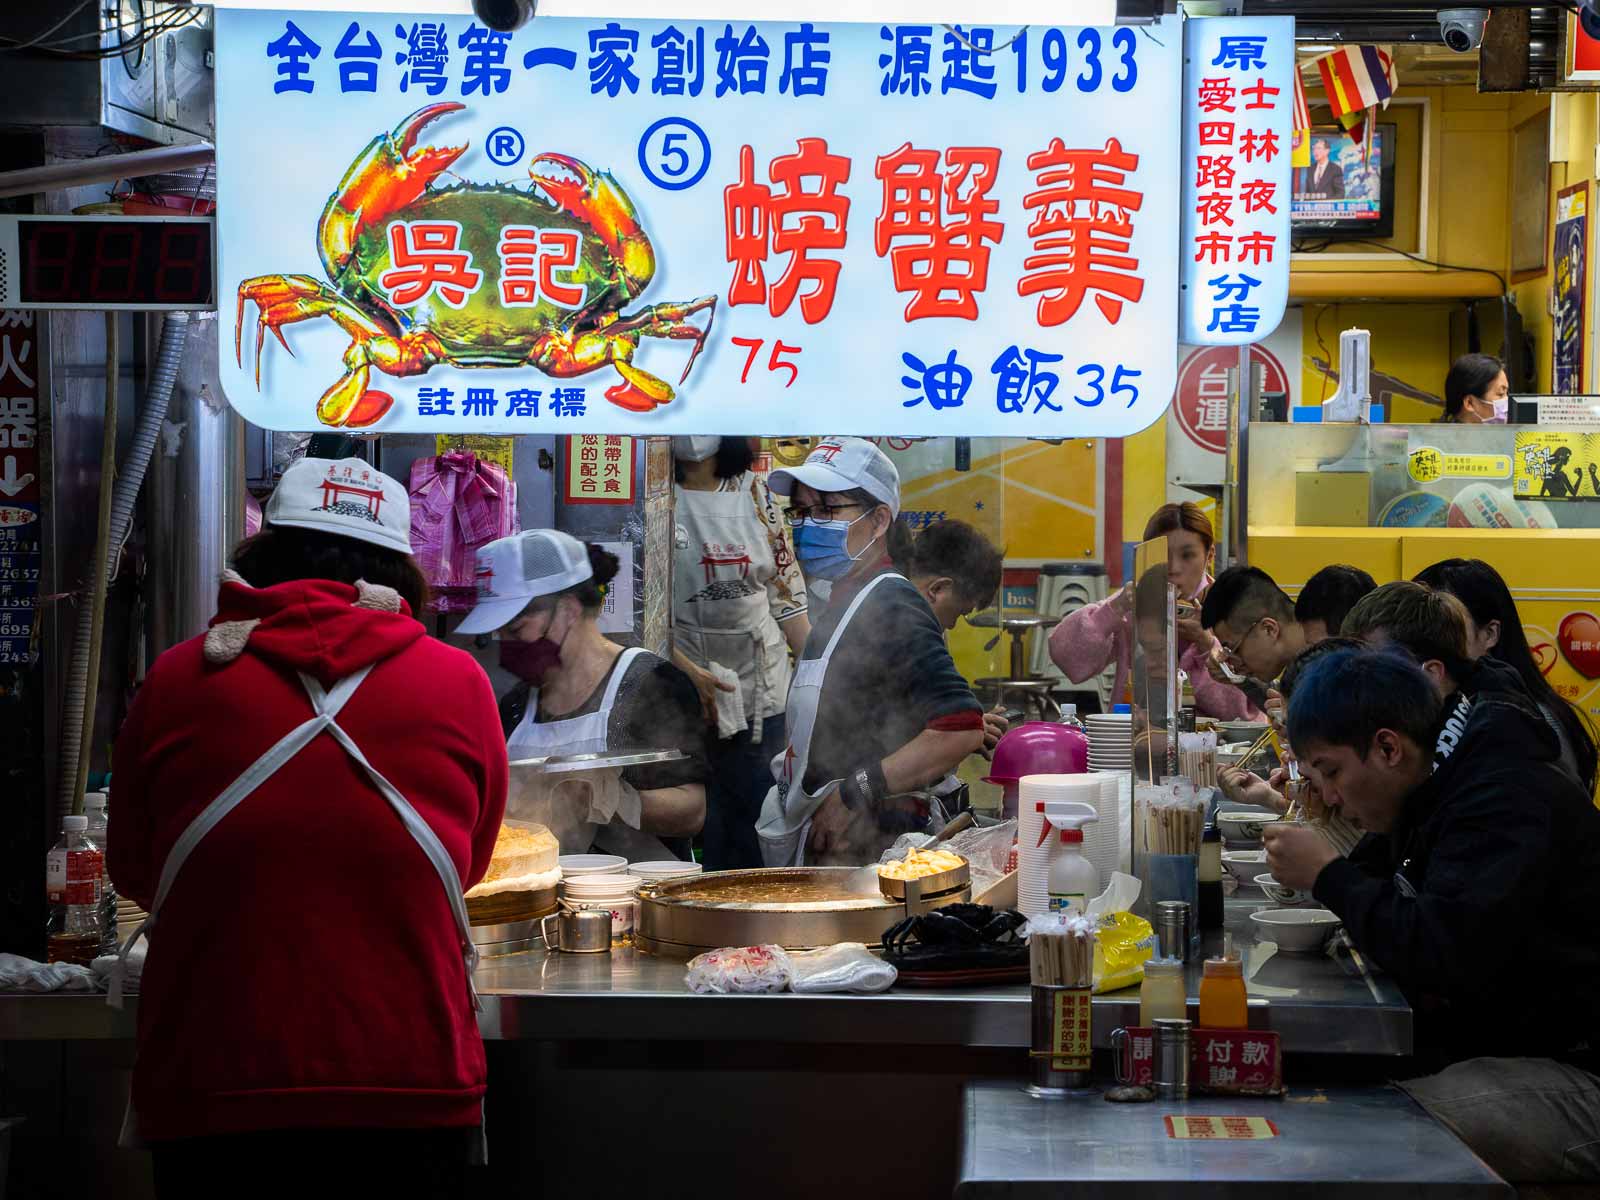 A stall, which has been operating since 1933, sells crab soup on the side of the street.